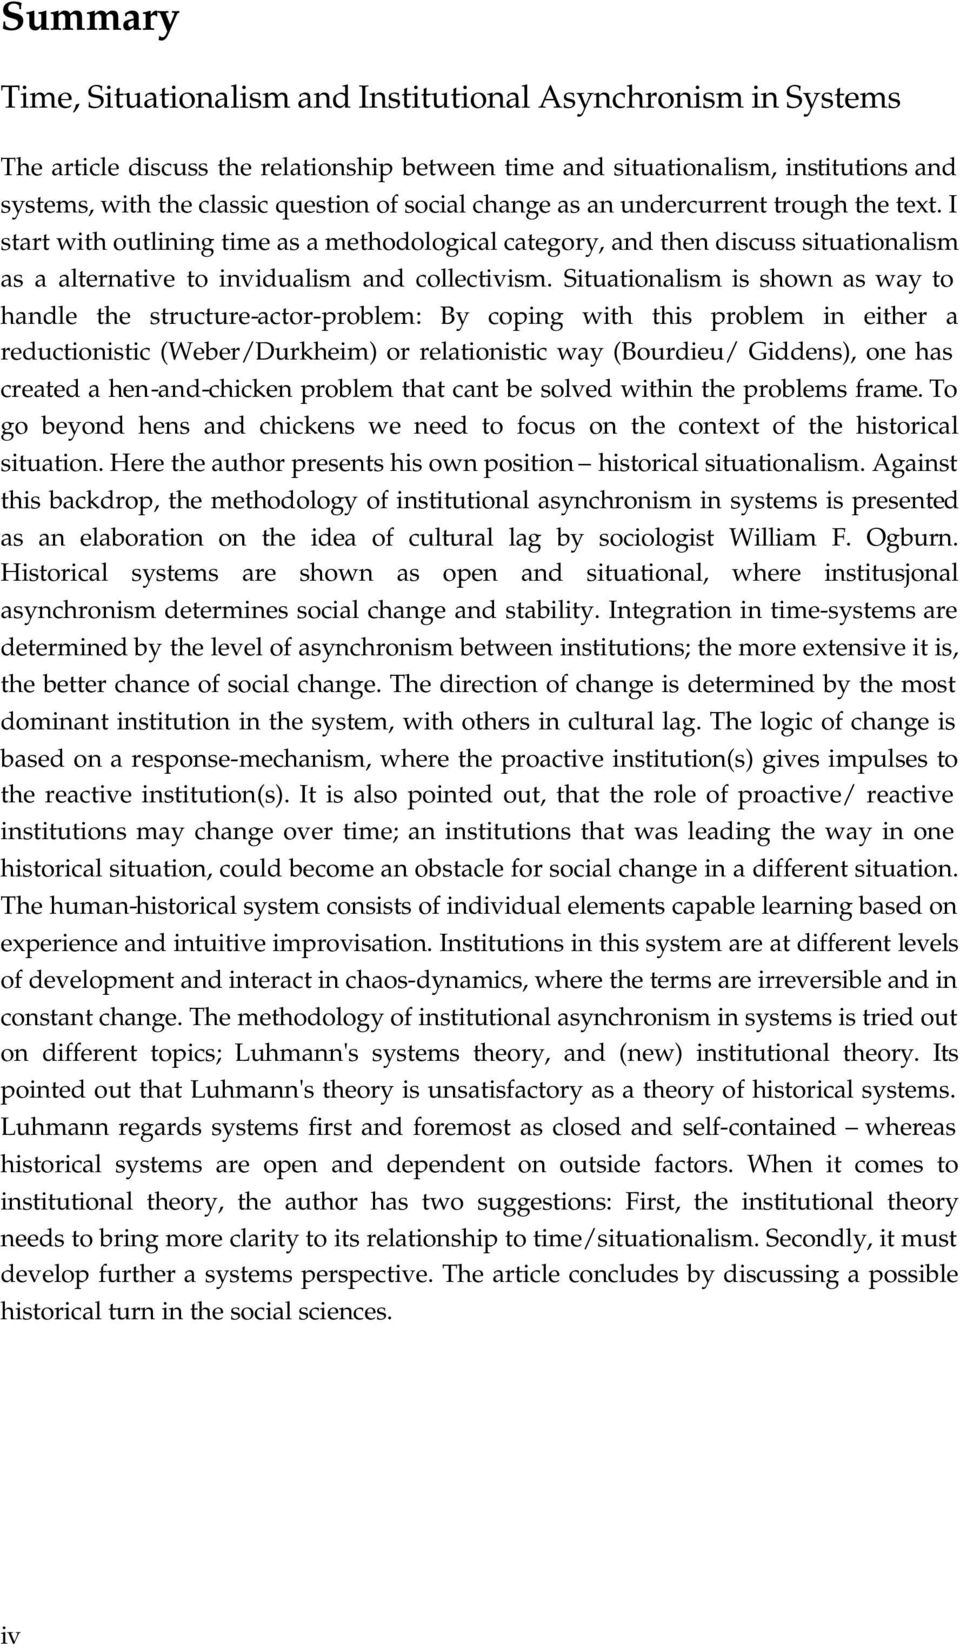 Situationalism is shown as way to handle the structure-actor-problem: By coping with this problem in either a reductionistic (Weber/Durkheim) or relationistic way (Bourdieu/ Giddens), one has created